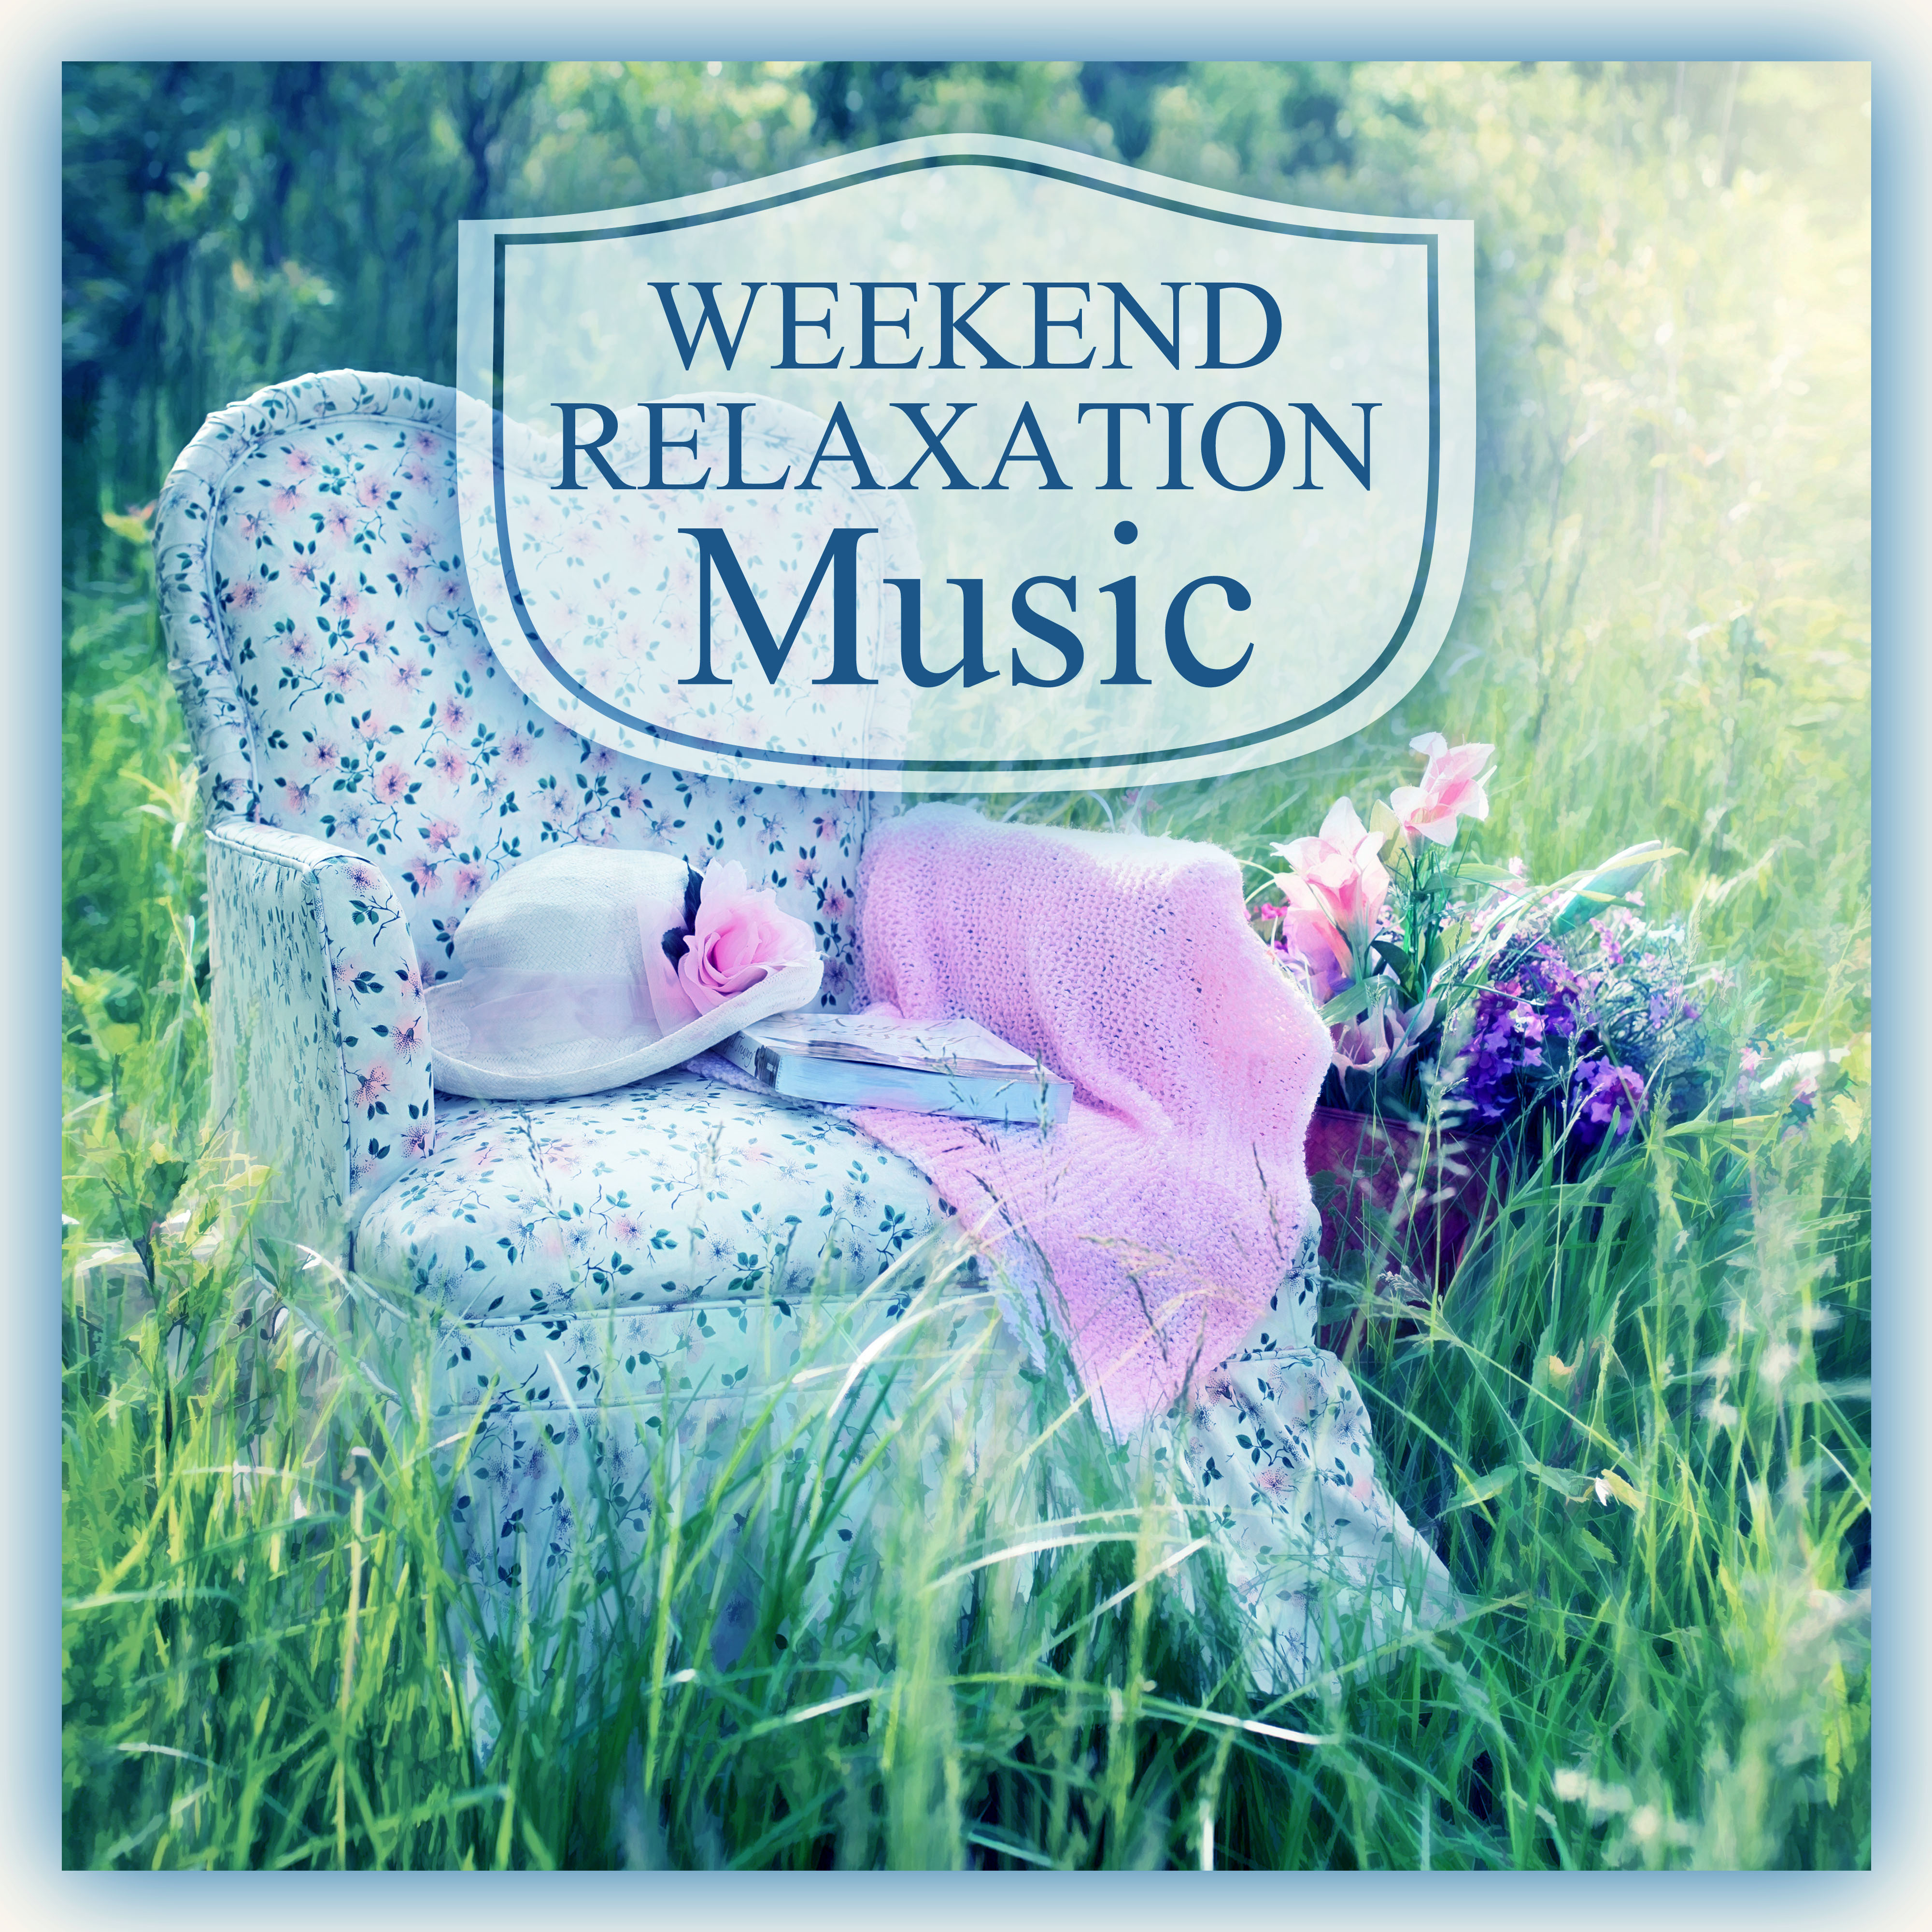 Weekend Relaxation Music – Music for Deep Relax & Time to Meditation, Spa, Wellness & Yoga, Healing Smooth Sounds for Therapy